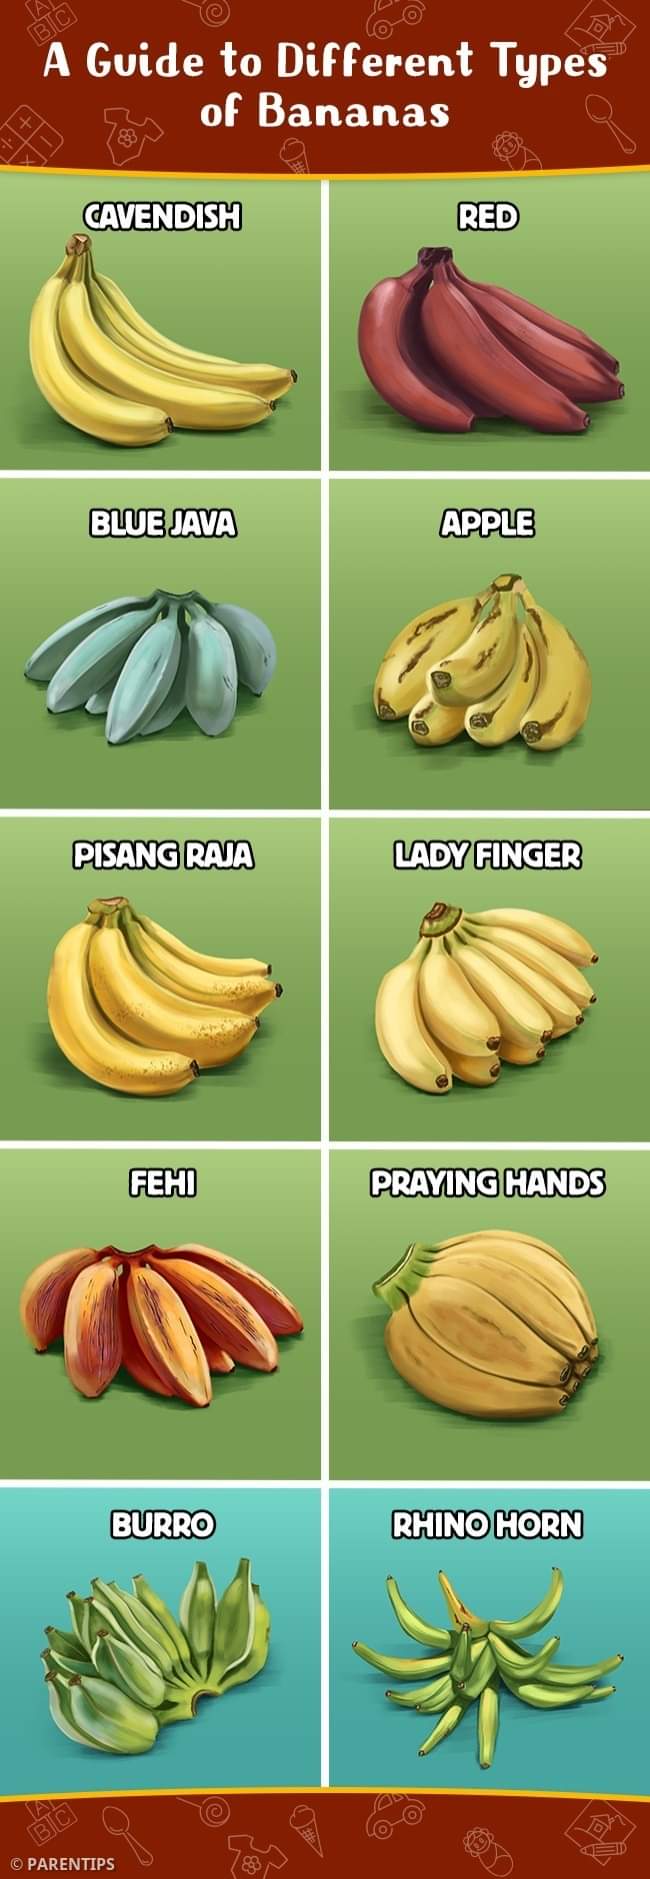 The 8 Tantalizing Types of Bananas | Daily Infographic